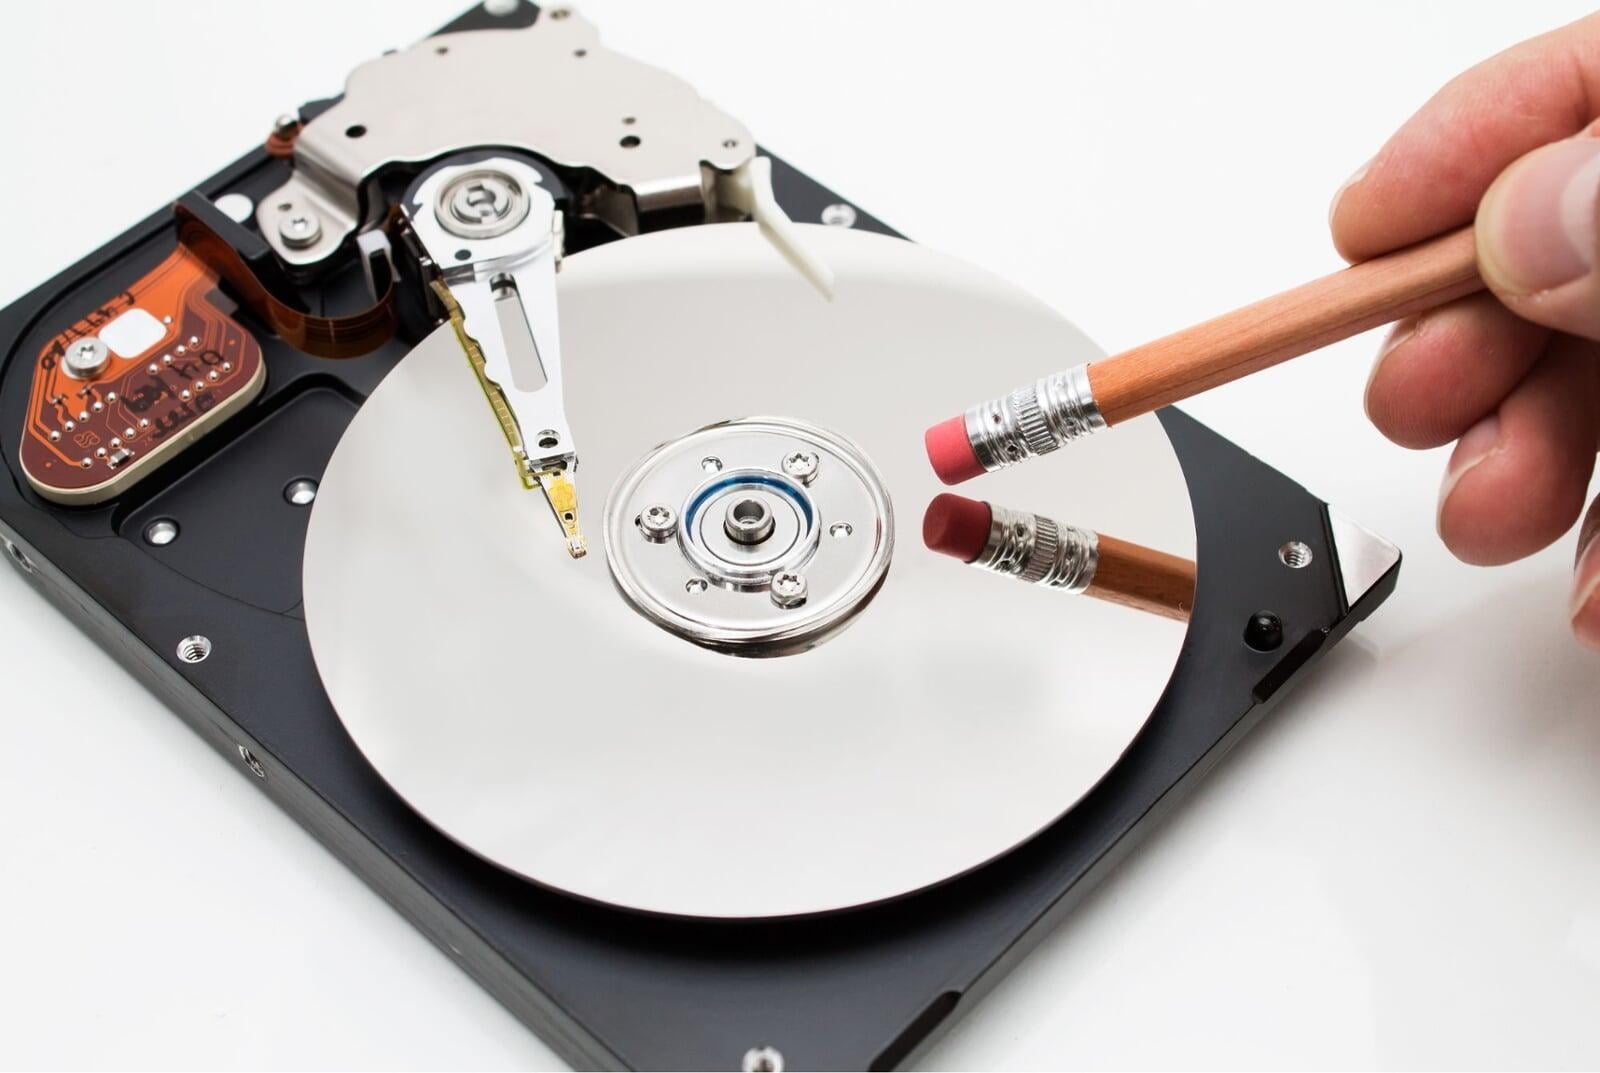 Data wiping from hard disk drive. Secure data erasure process by Justdispose with industry-standard tools